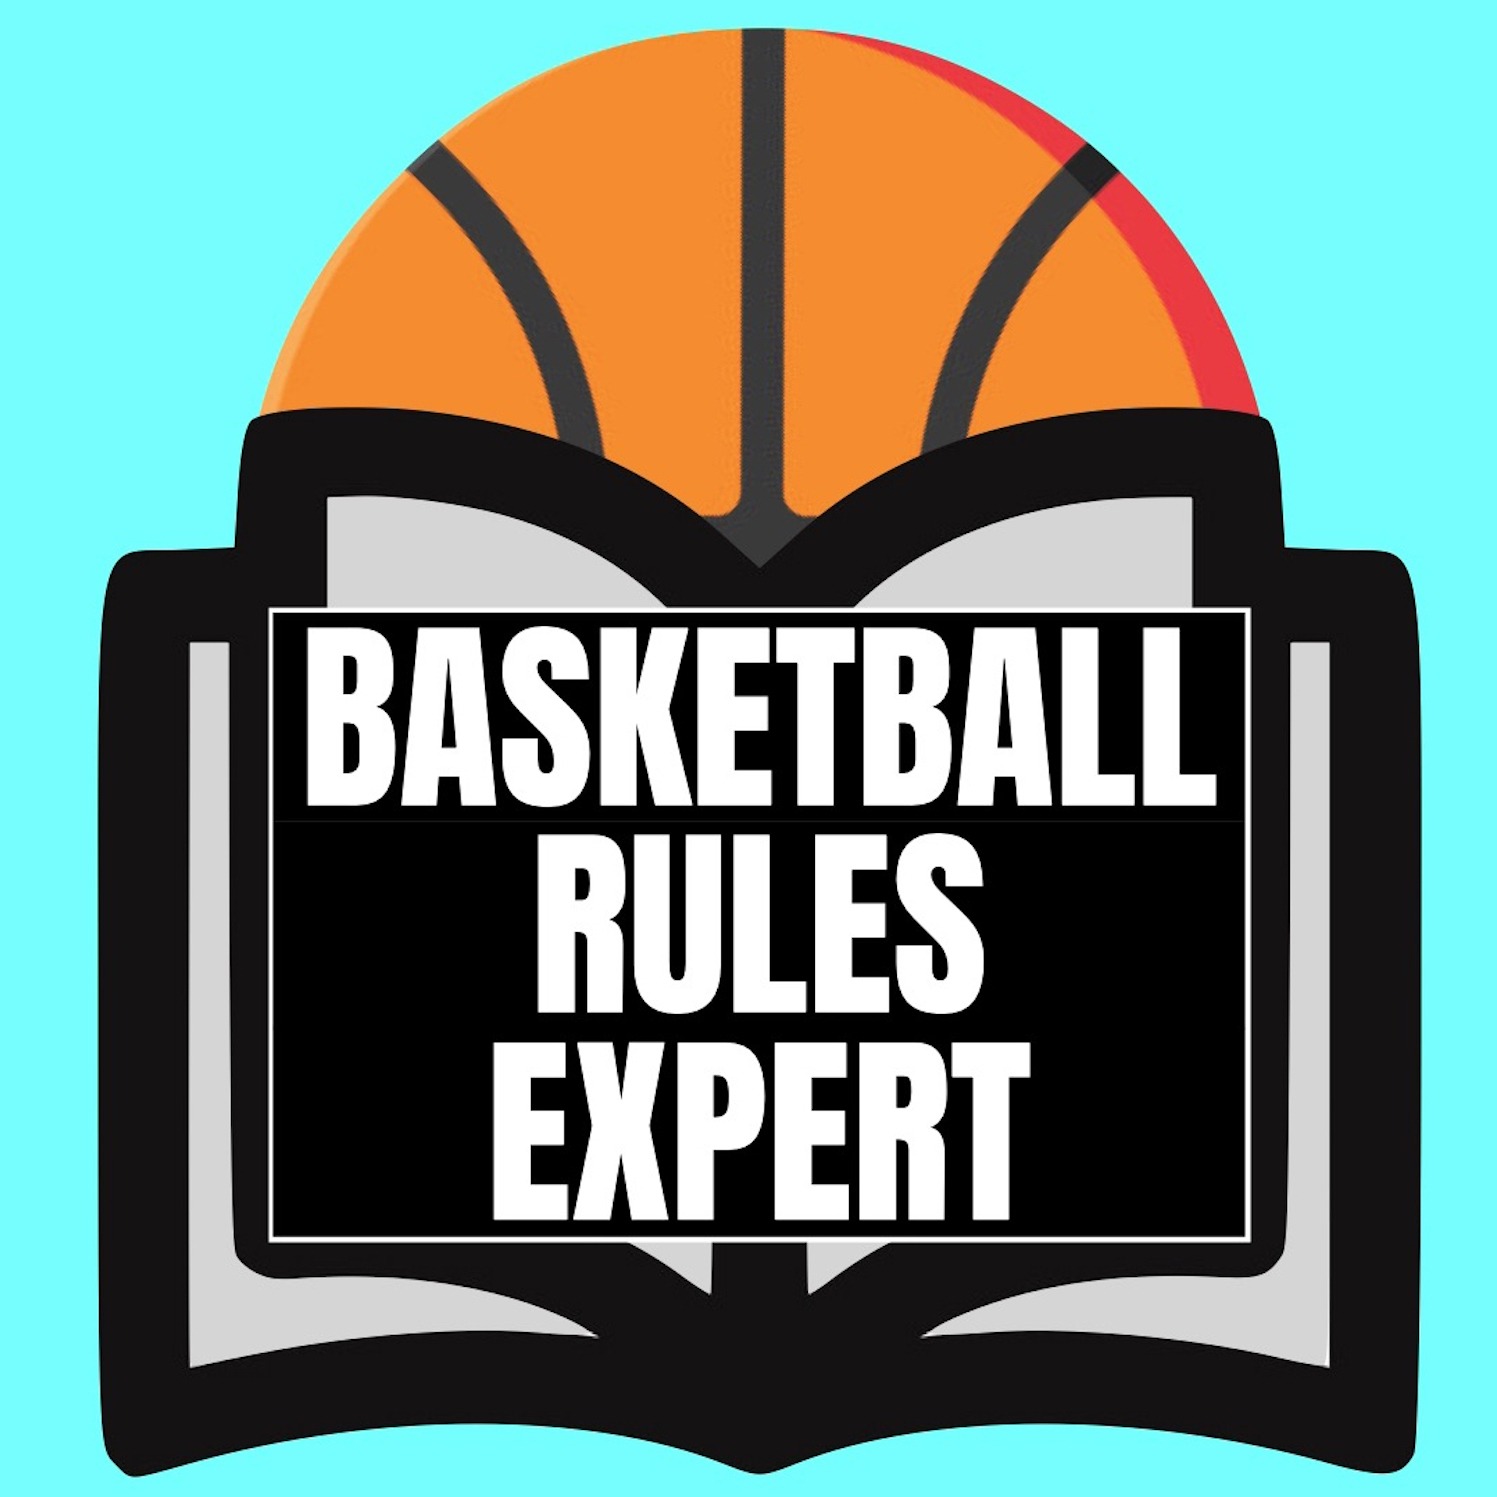 Episode 2 - Intentional Fouls & Continuous Motion